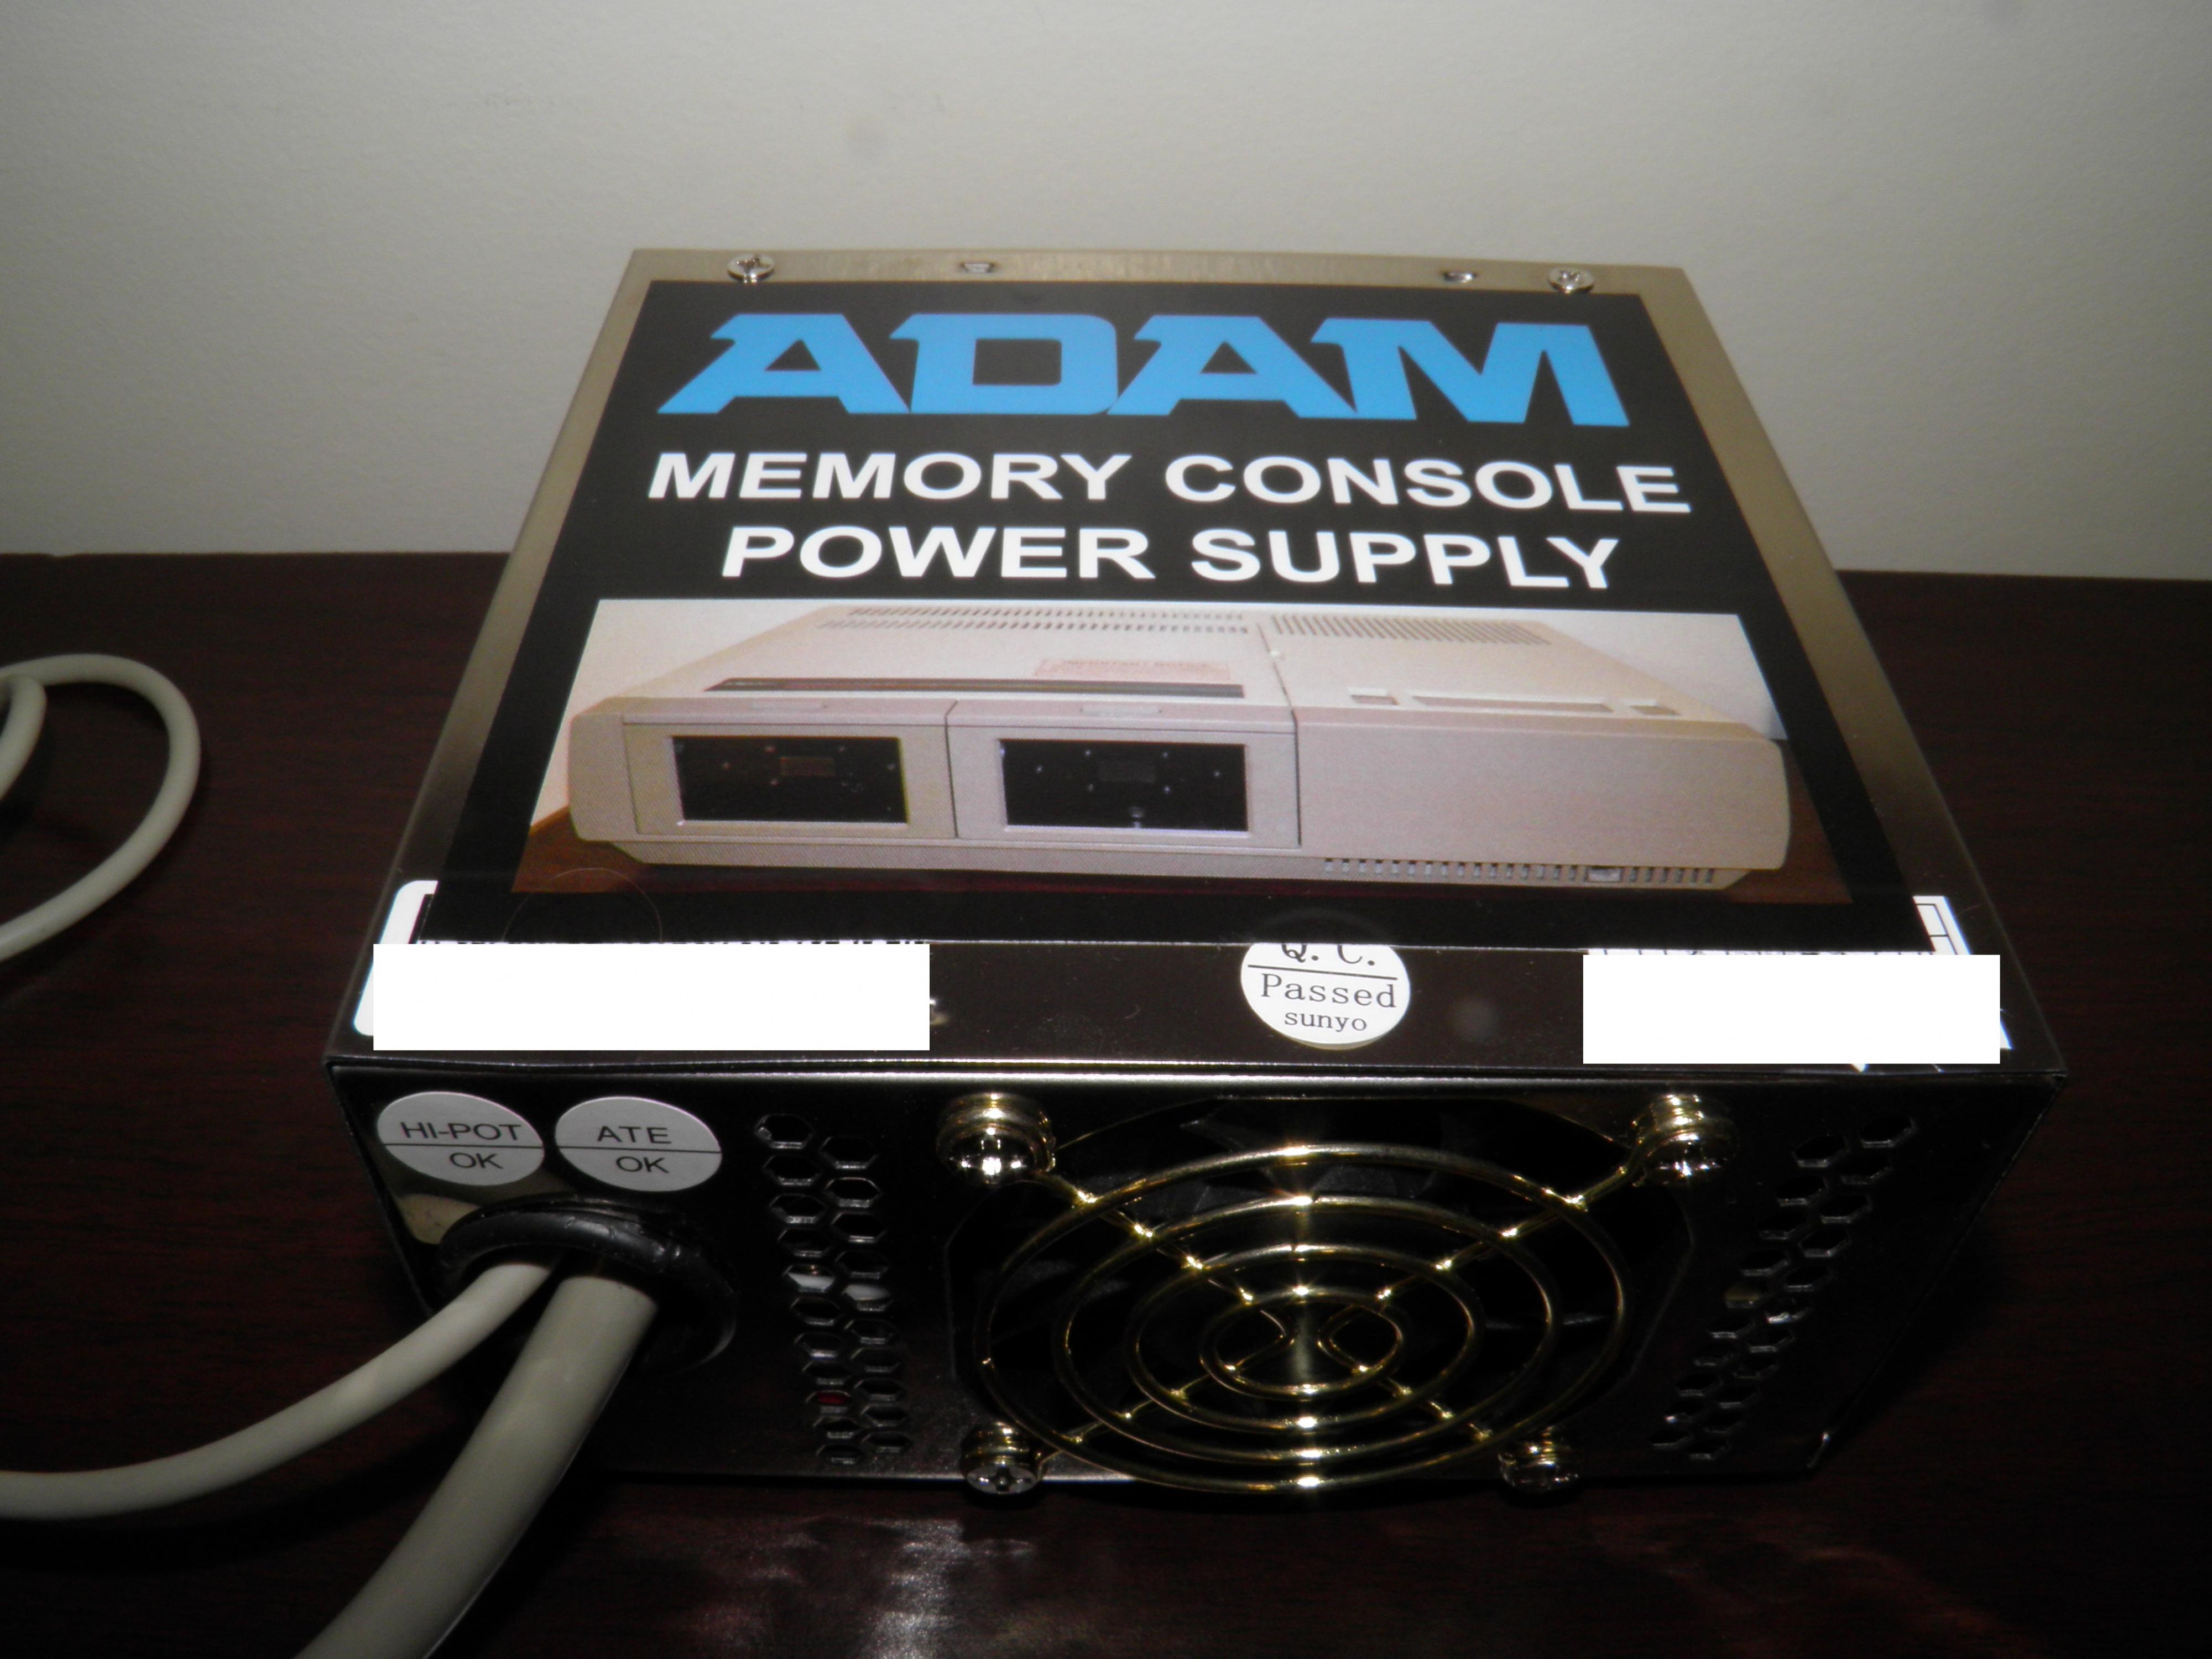 Apollo 400 Watt Power Supply for The Coleco ADAM Computer Memory Console Included in Retail Box United States 5ft